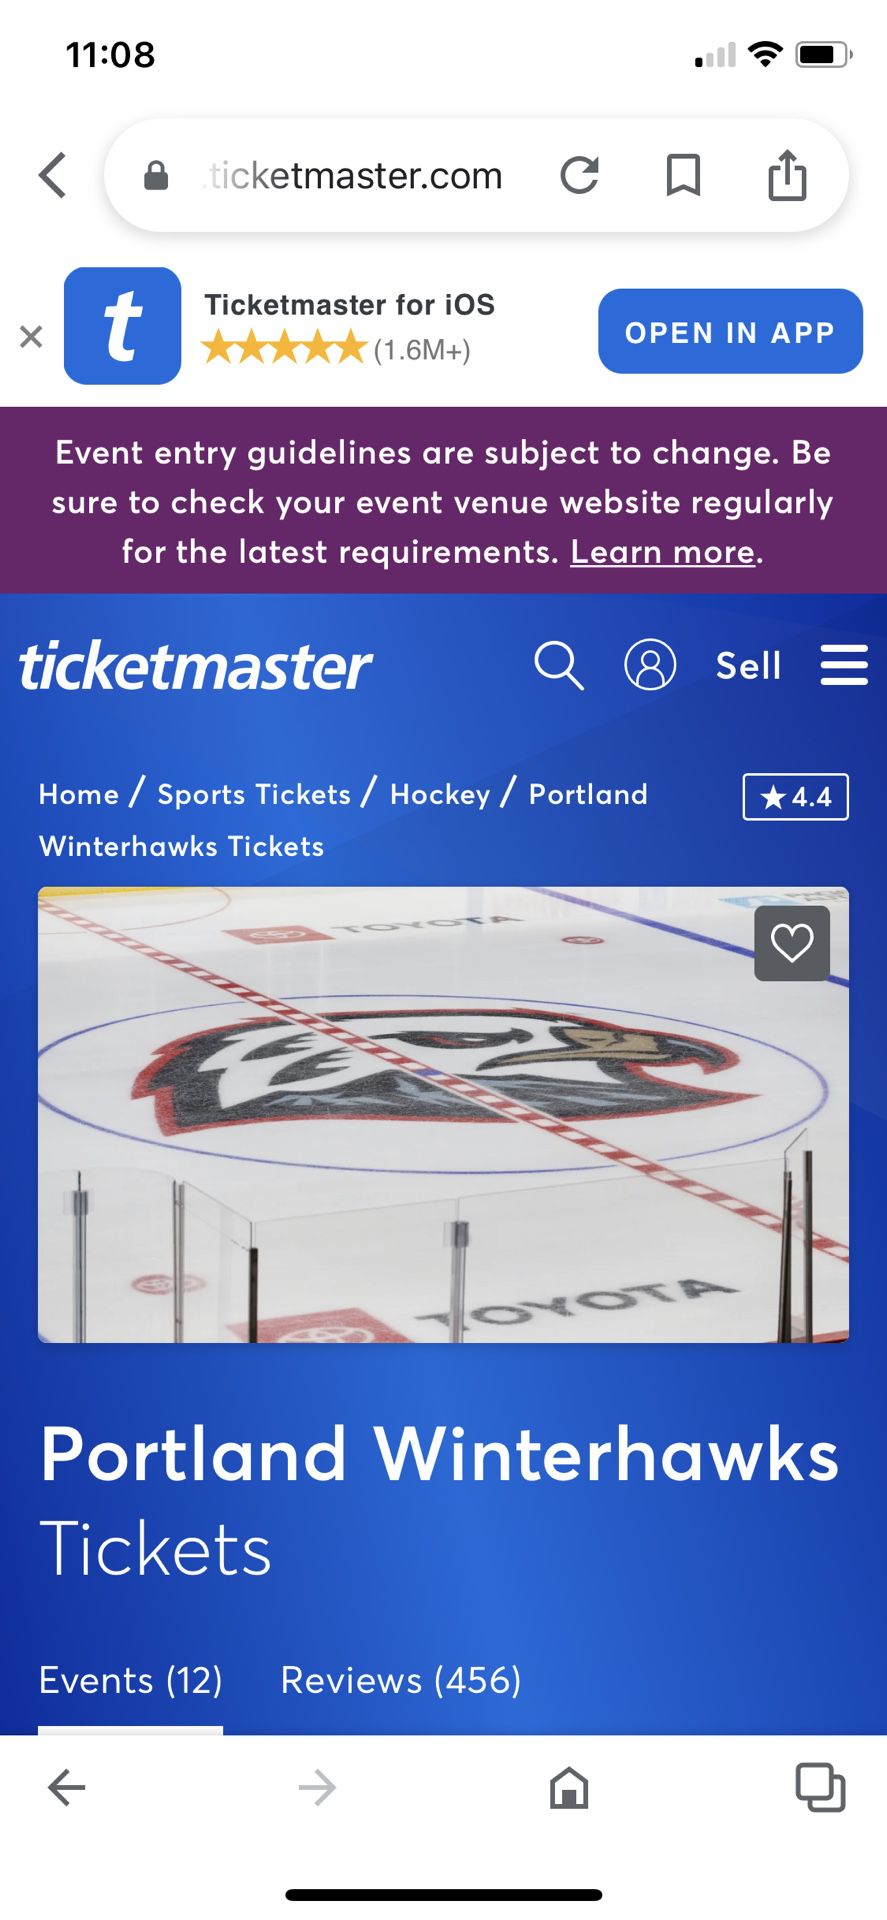 Winterhawks tickets for 10/27 game